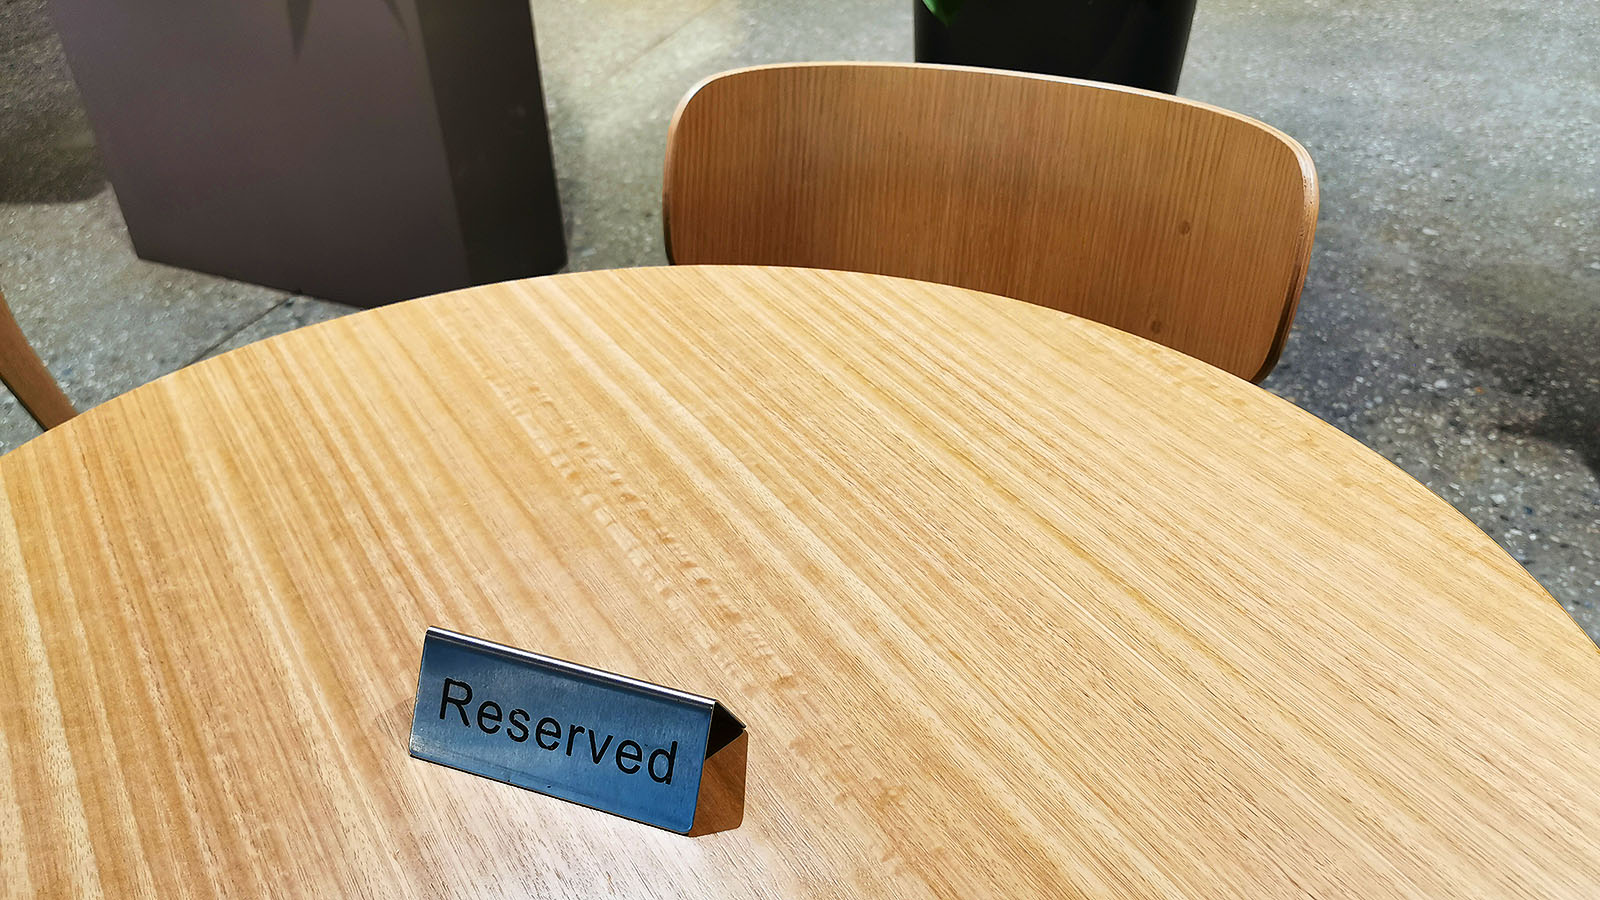 Reserved sign on a dining table at the Qantas International Business Lounge in Singapore